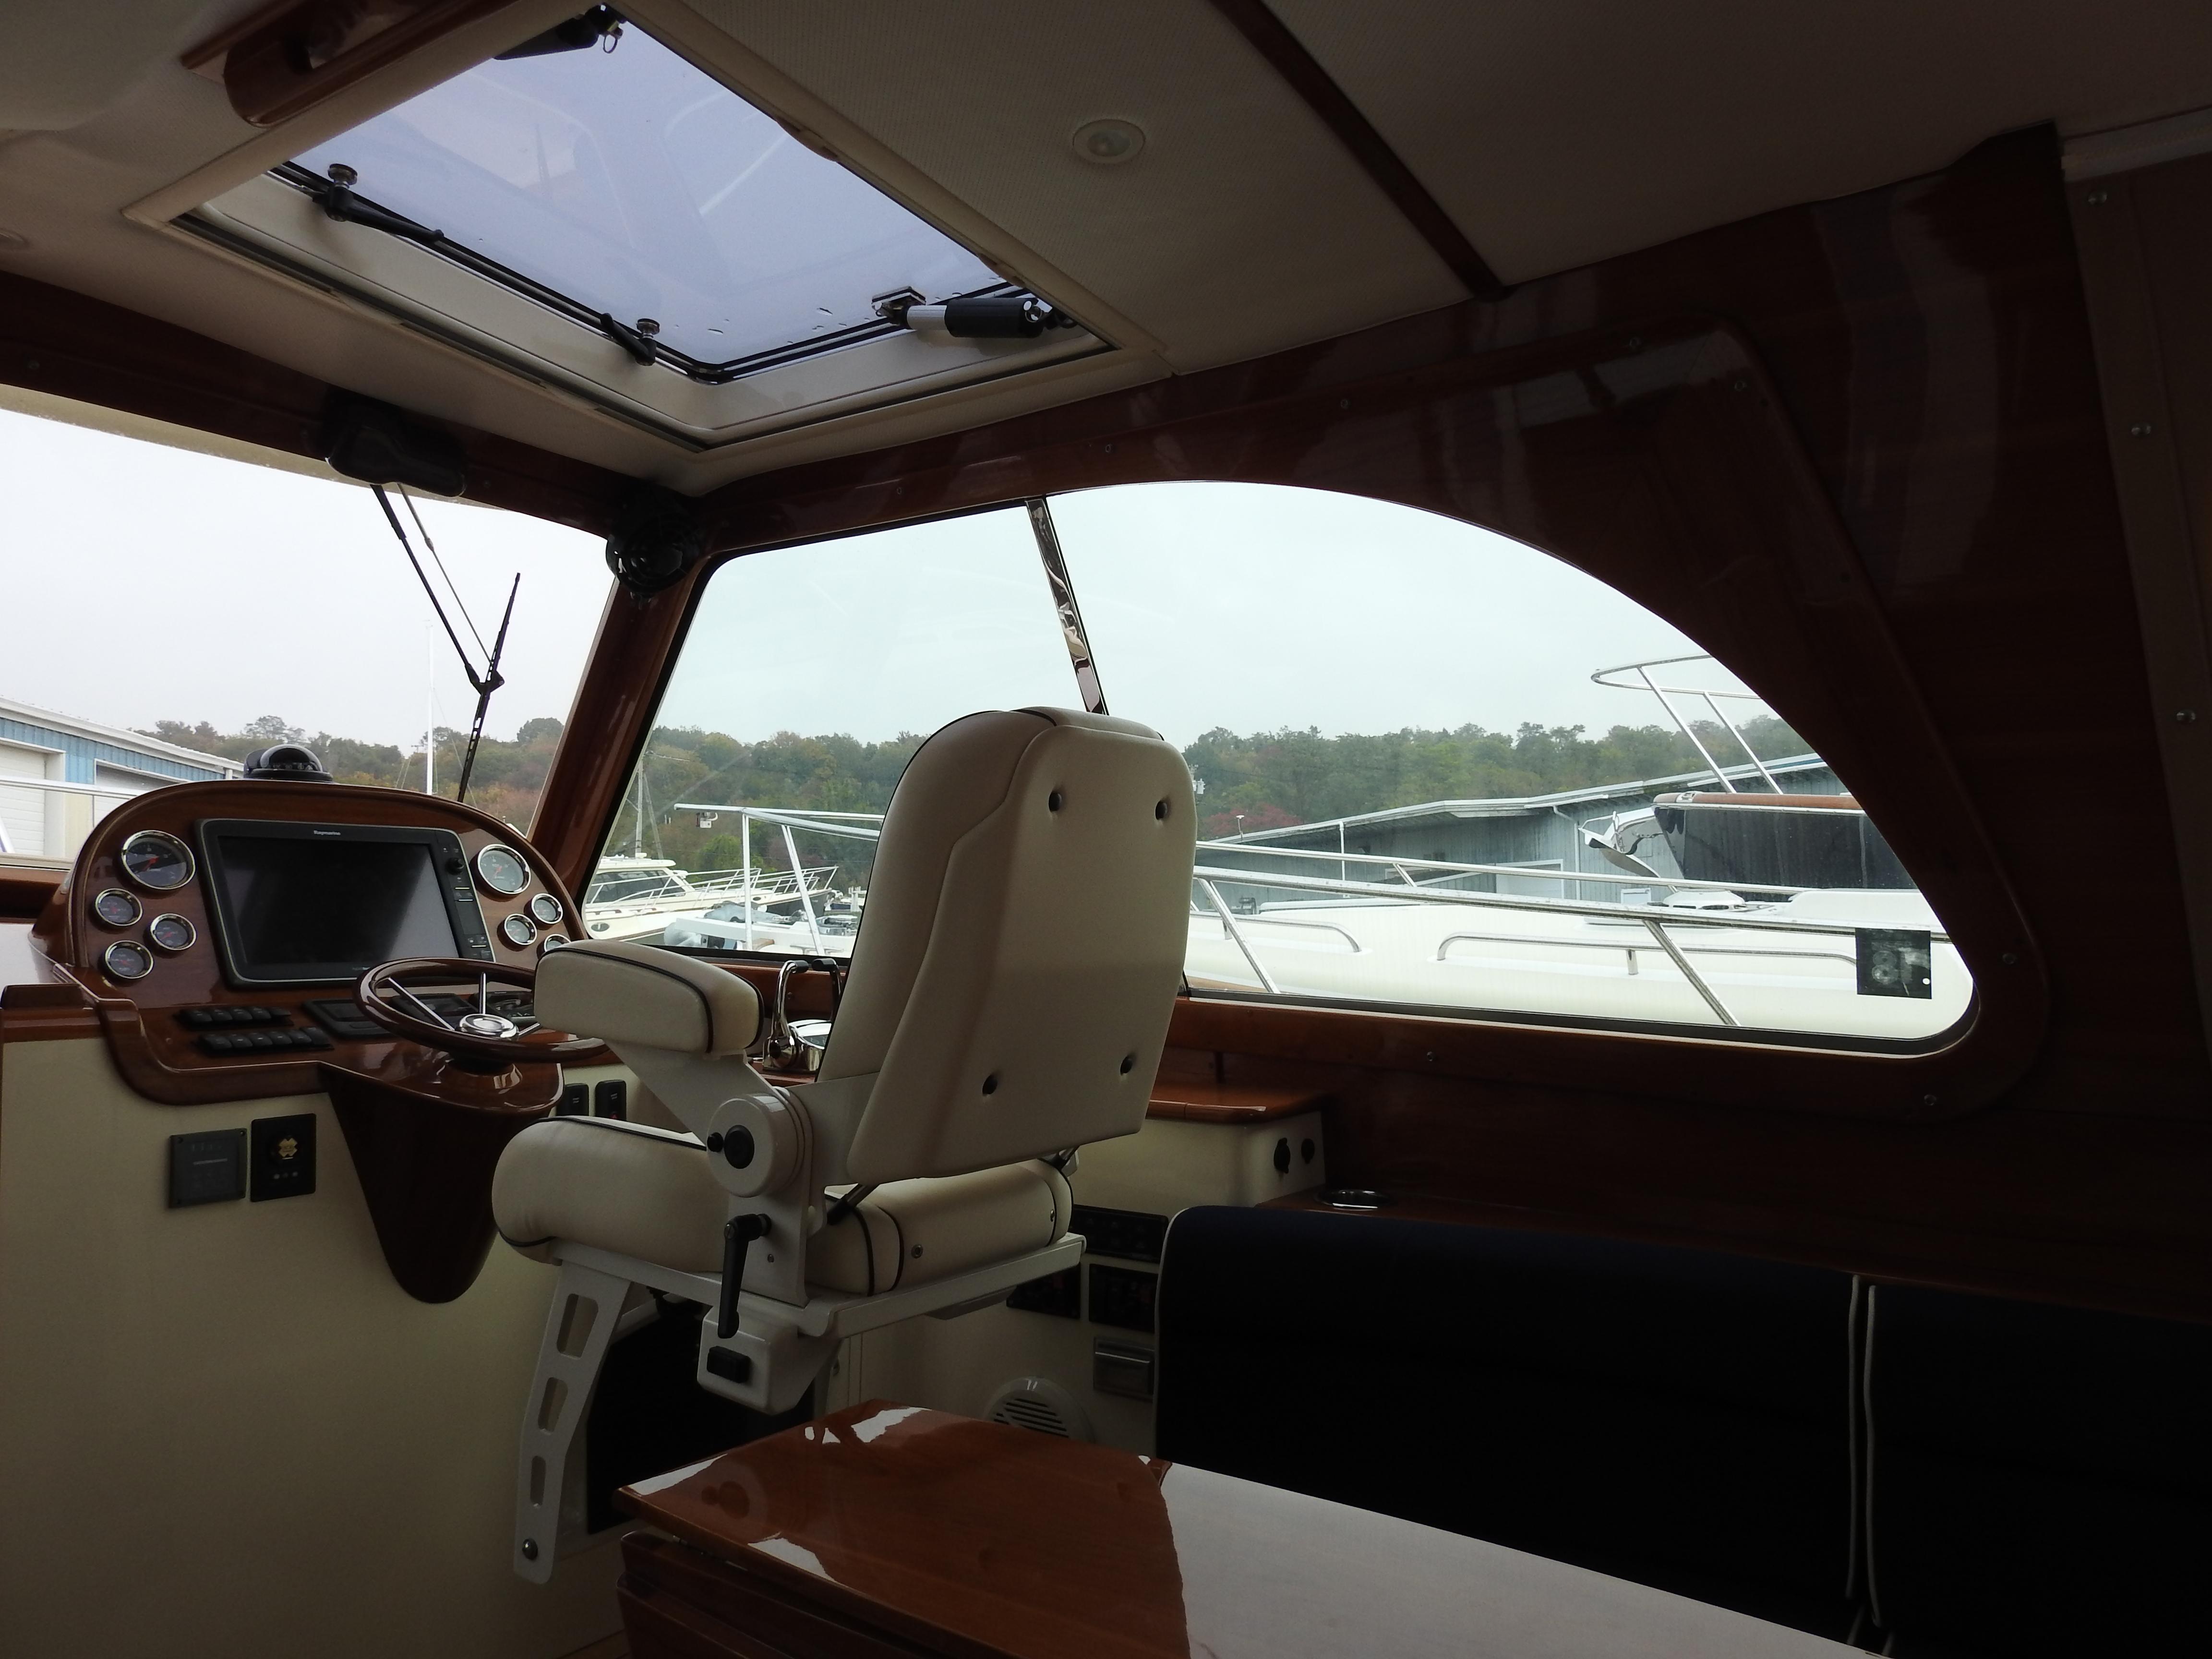 Knot For Sale Yacht for Sale  37 Hinckley Yachts Sag Harbor, NY